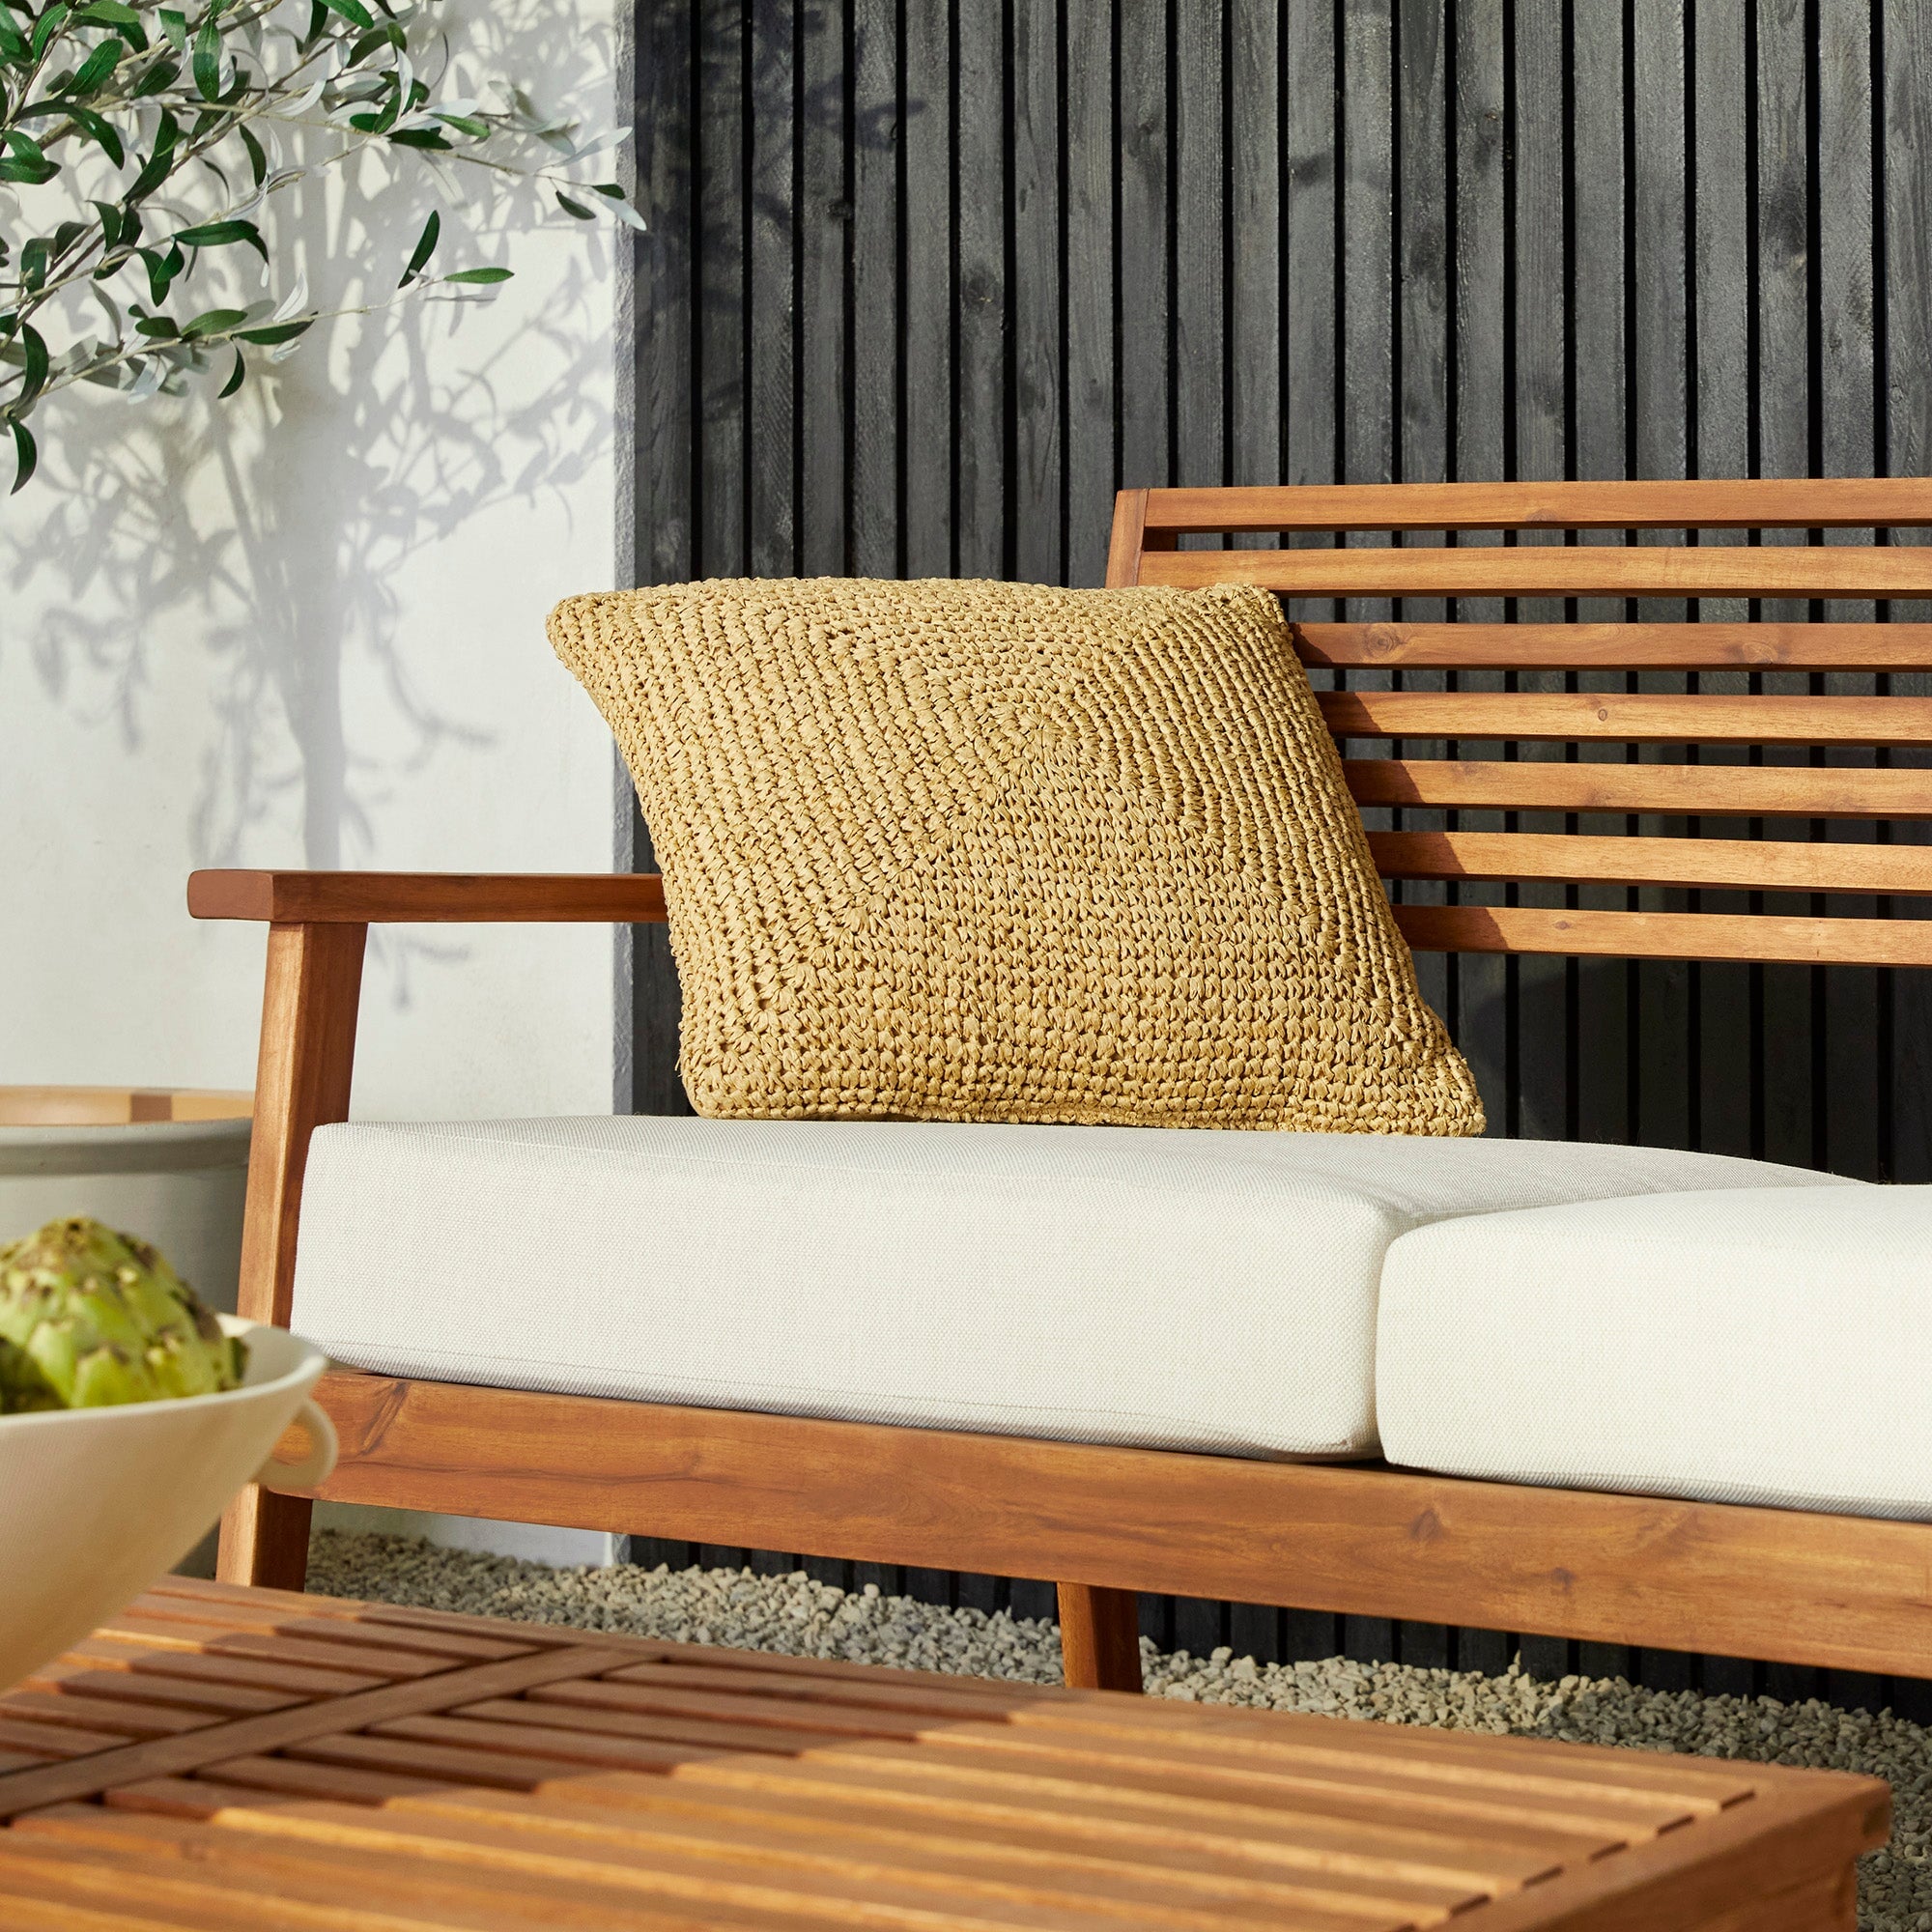 Walker Edison Zander 4-Piece Mid-Century Modern Acacia Outdoor Slat-Back Chat Set with Coffee Table